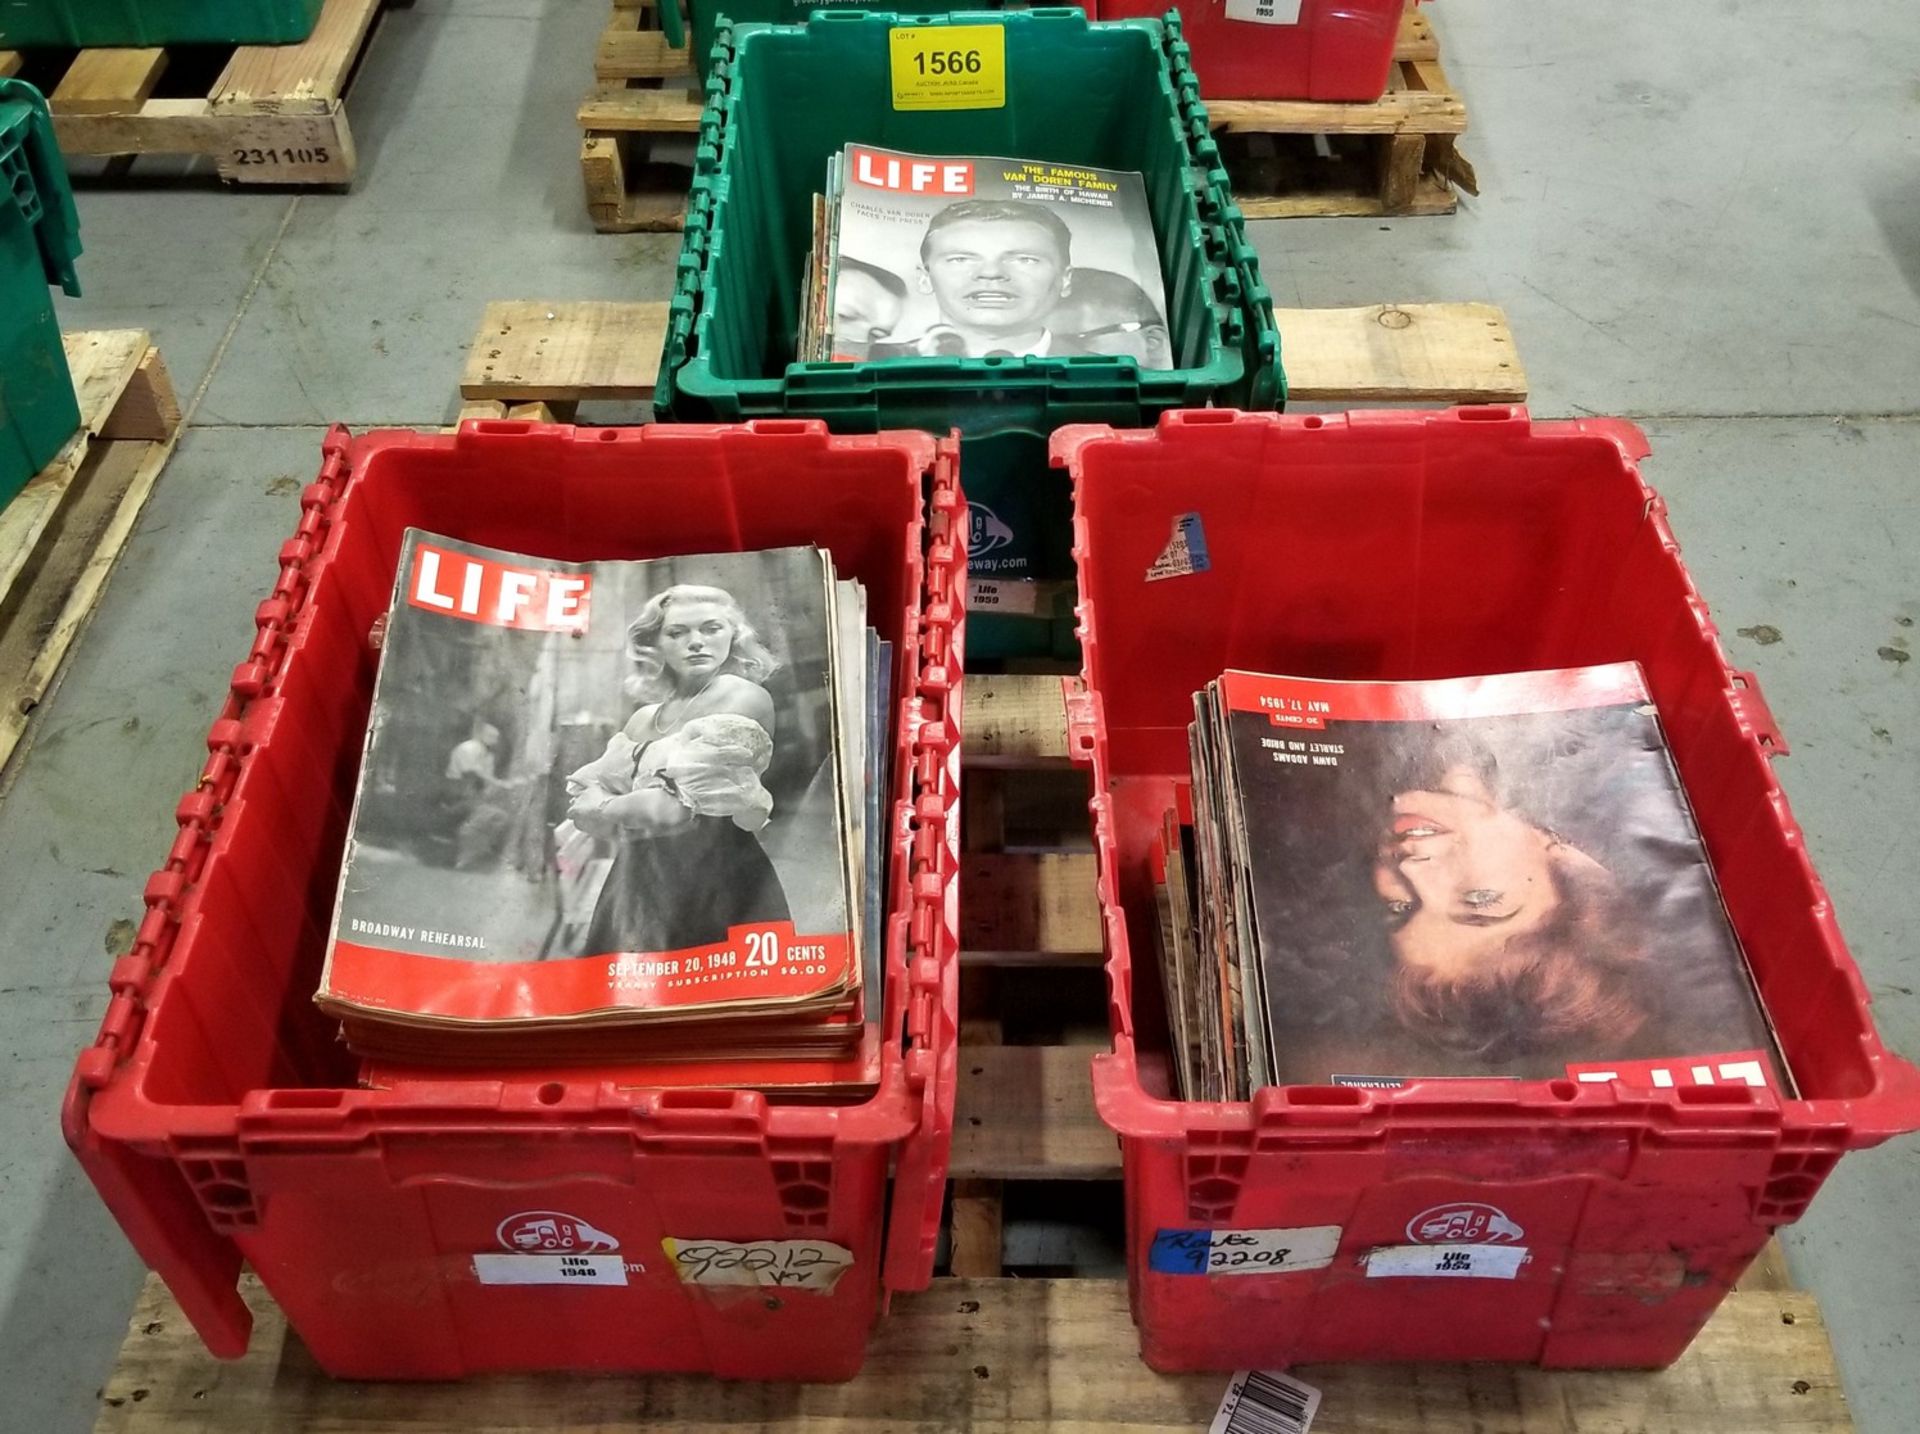 VINTAGE TIME MAGAZINES - APPROX 130 ISSUES - YEARS INDICATED IN PHOTOS - 1948, 1954, 1959